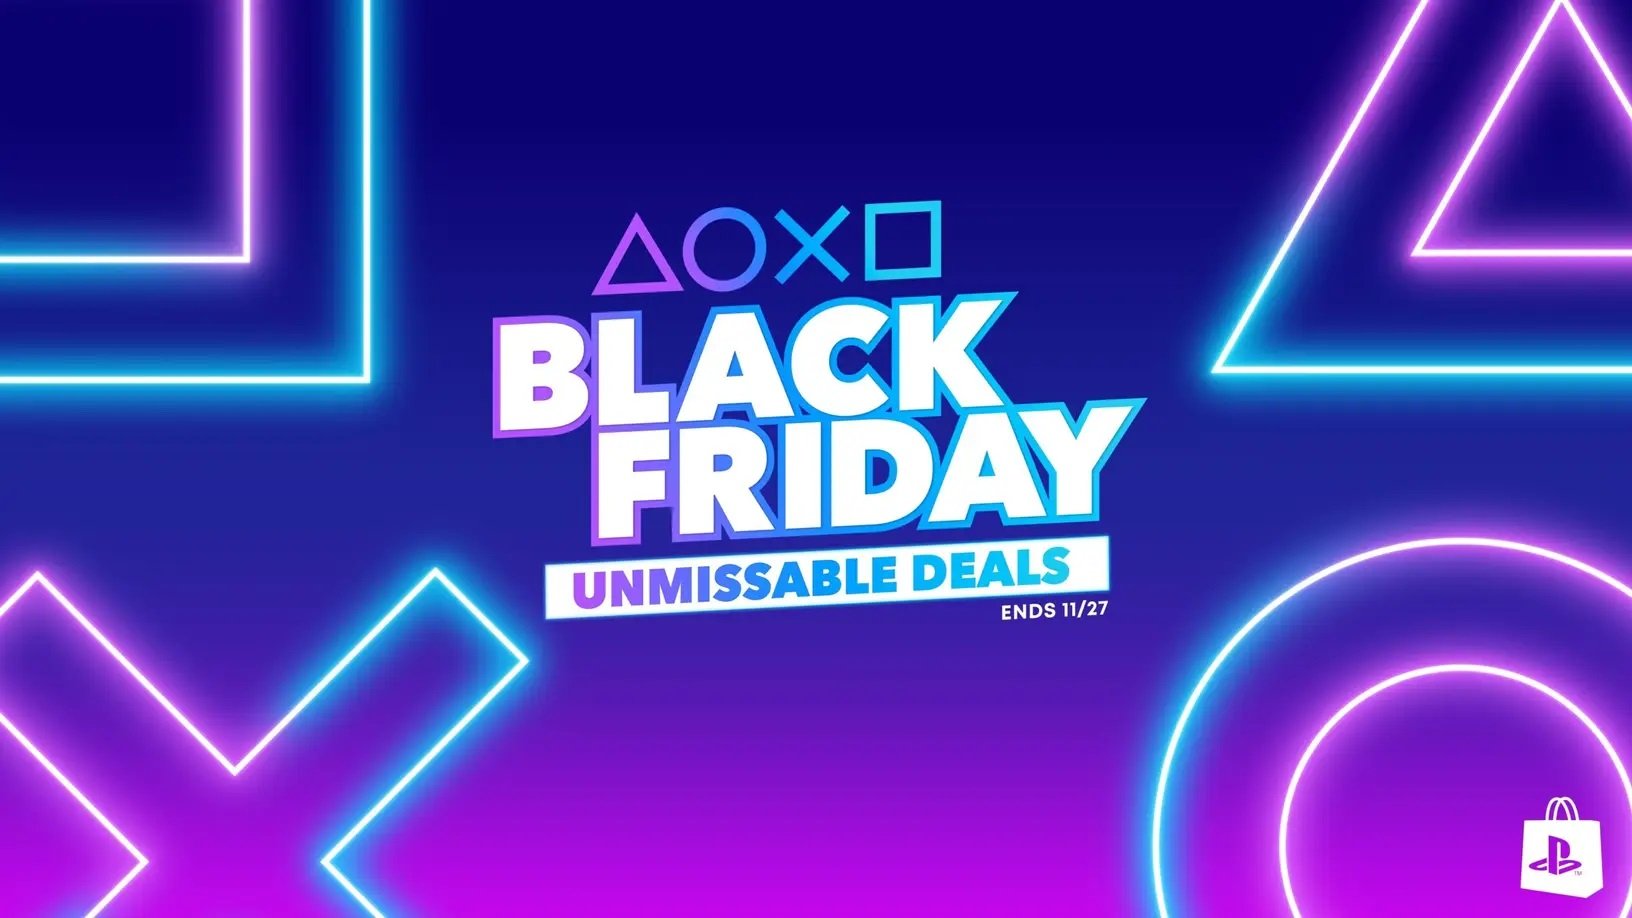 Sony's Black Friday sale will include up to 30% off PlayStation